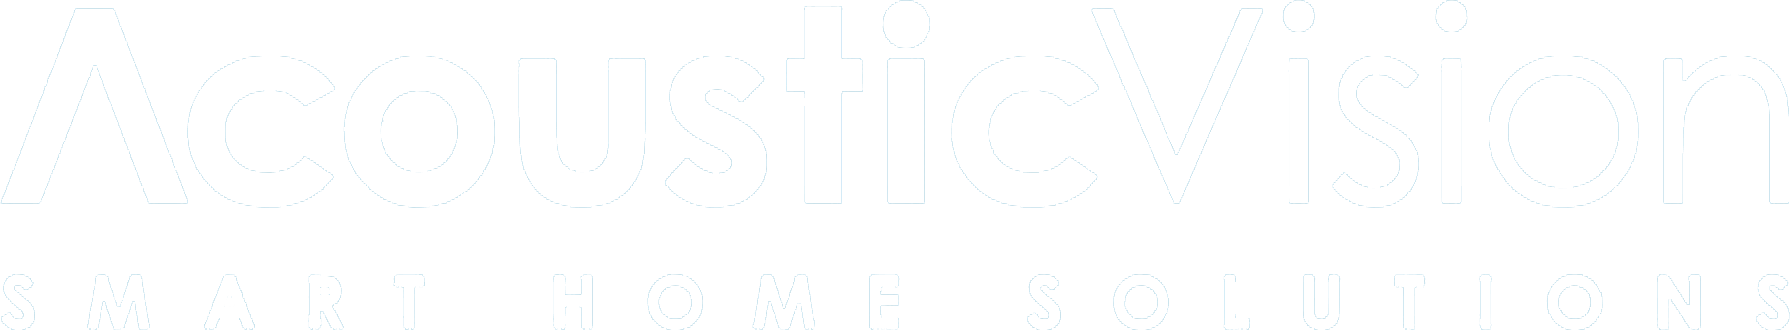 Acoustic Vision Smart home Solution Company logo